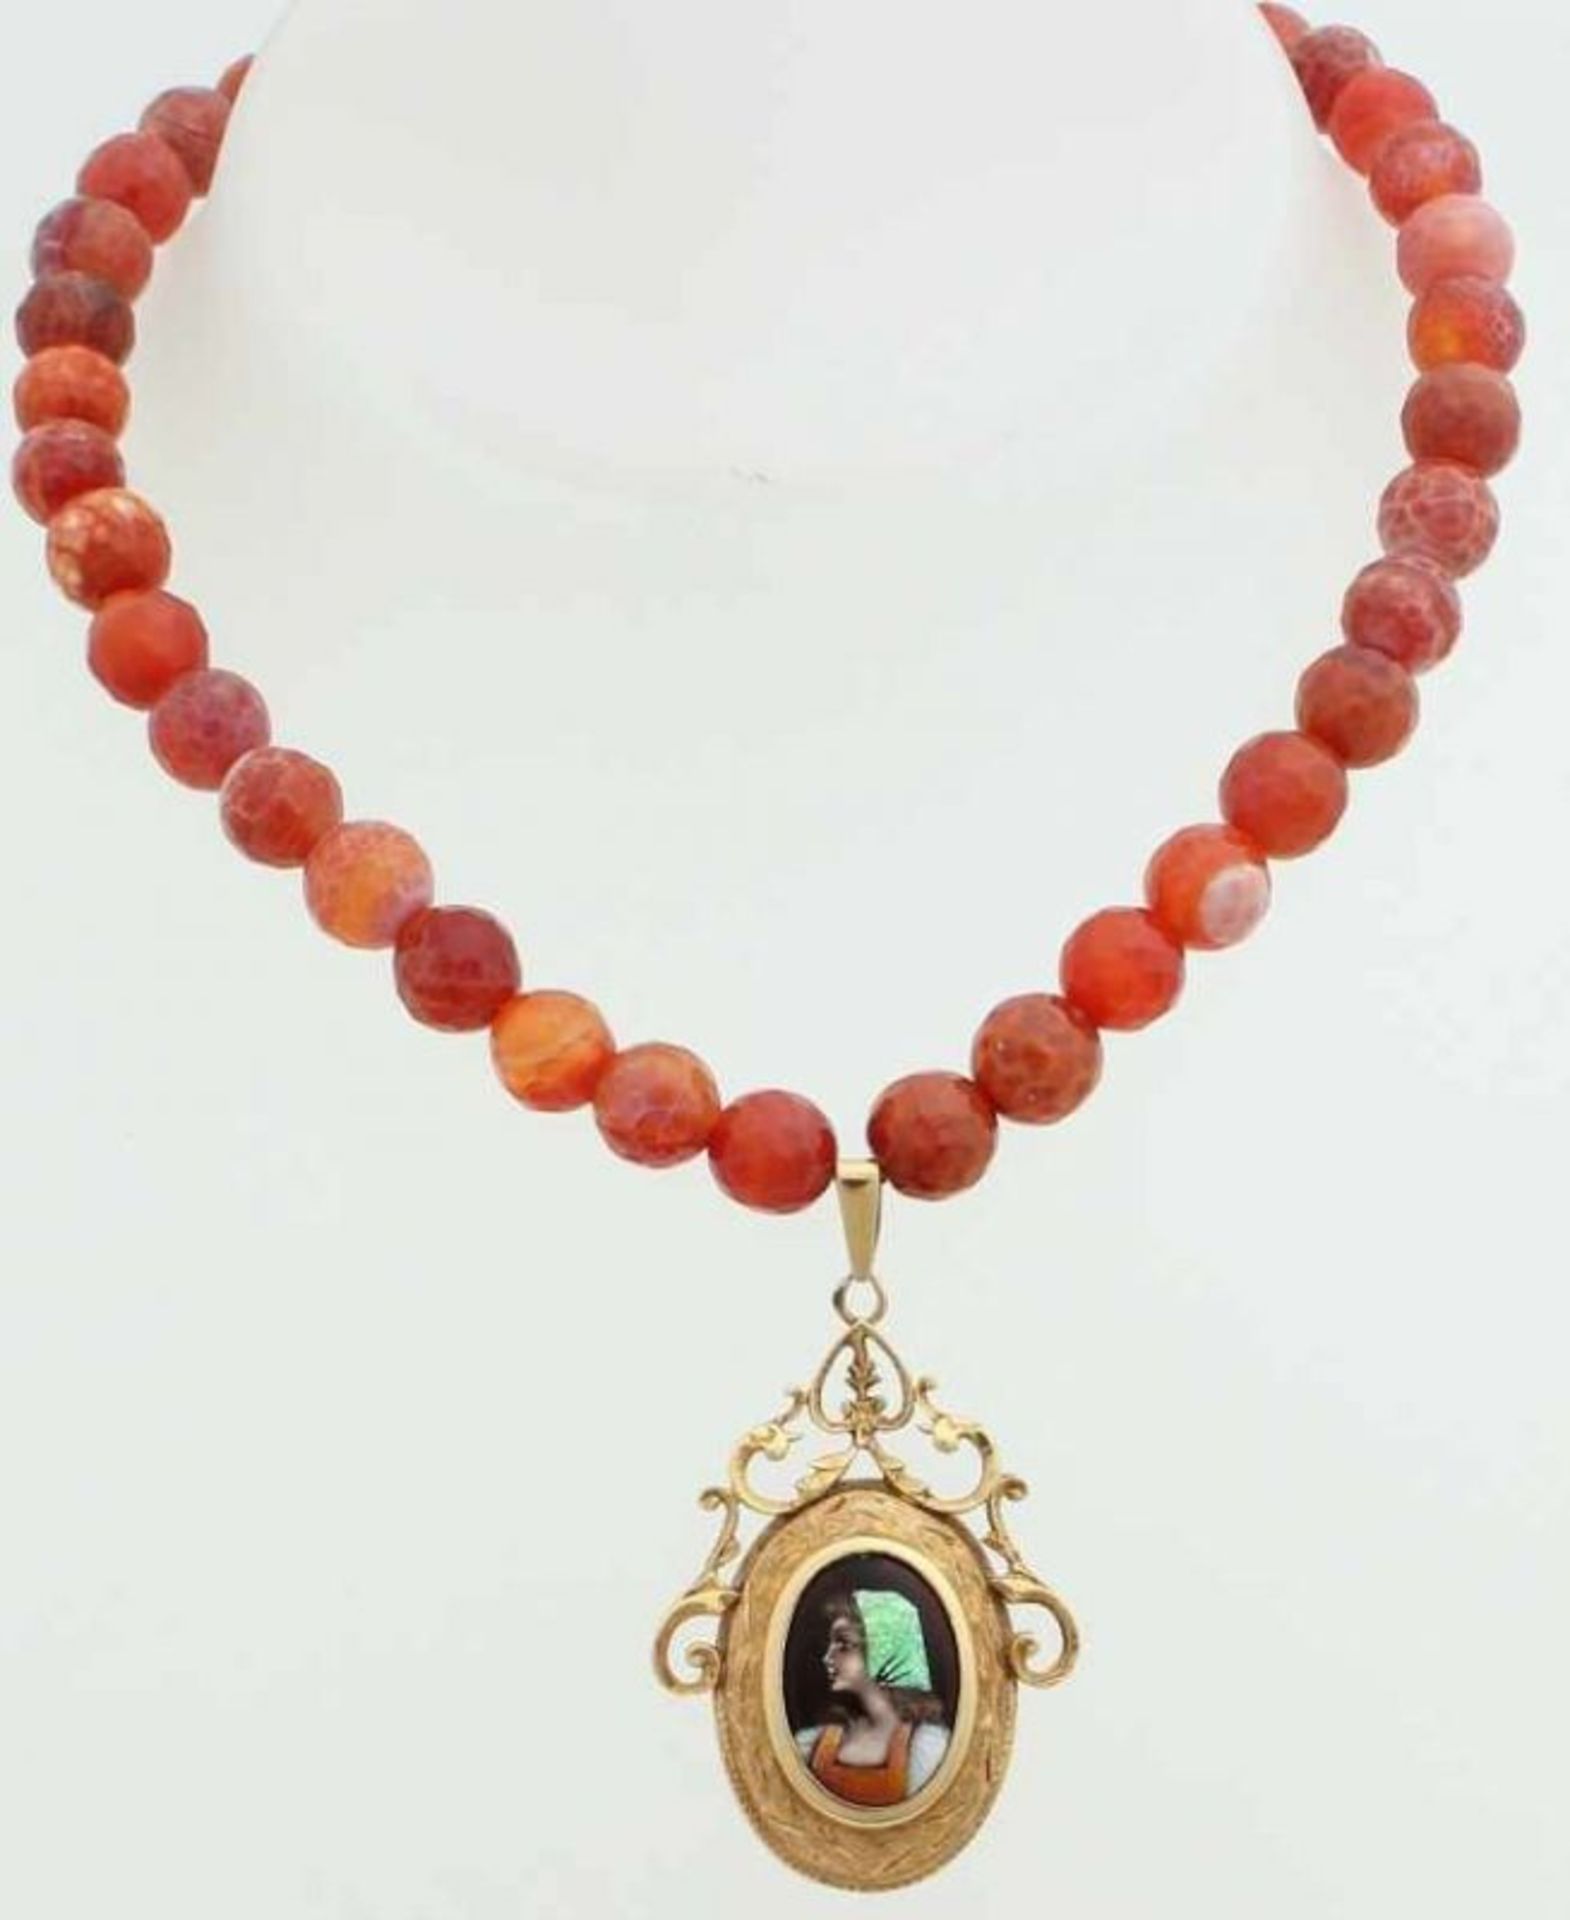 Collier agate beads with a gold pendant limoges, 585/000. Necklace with faceted agate beads with a